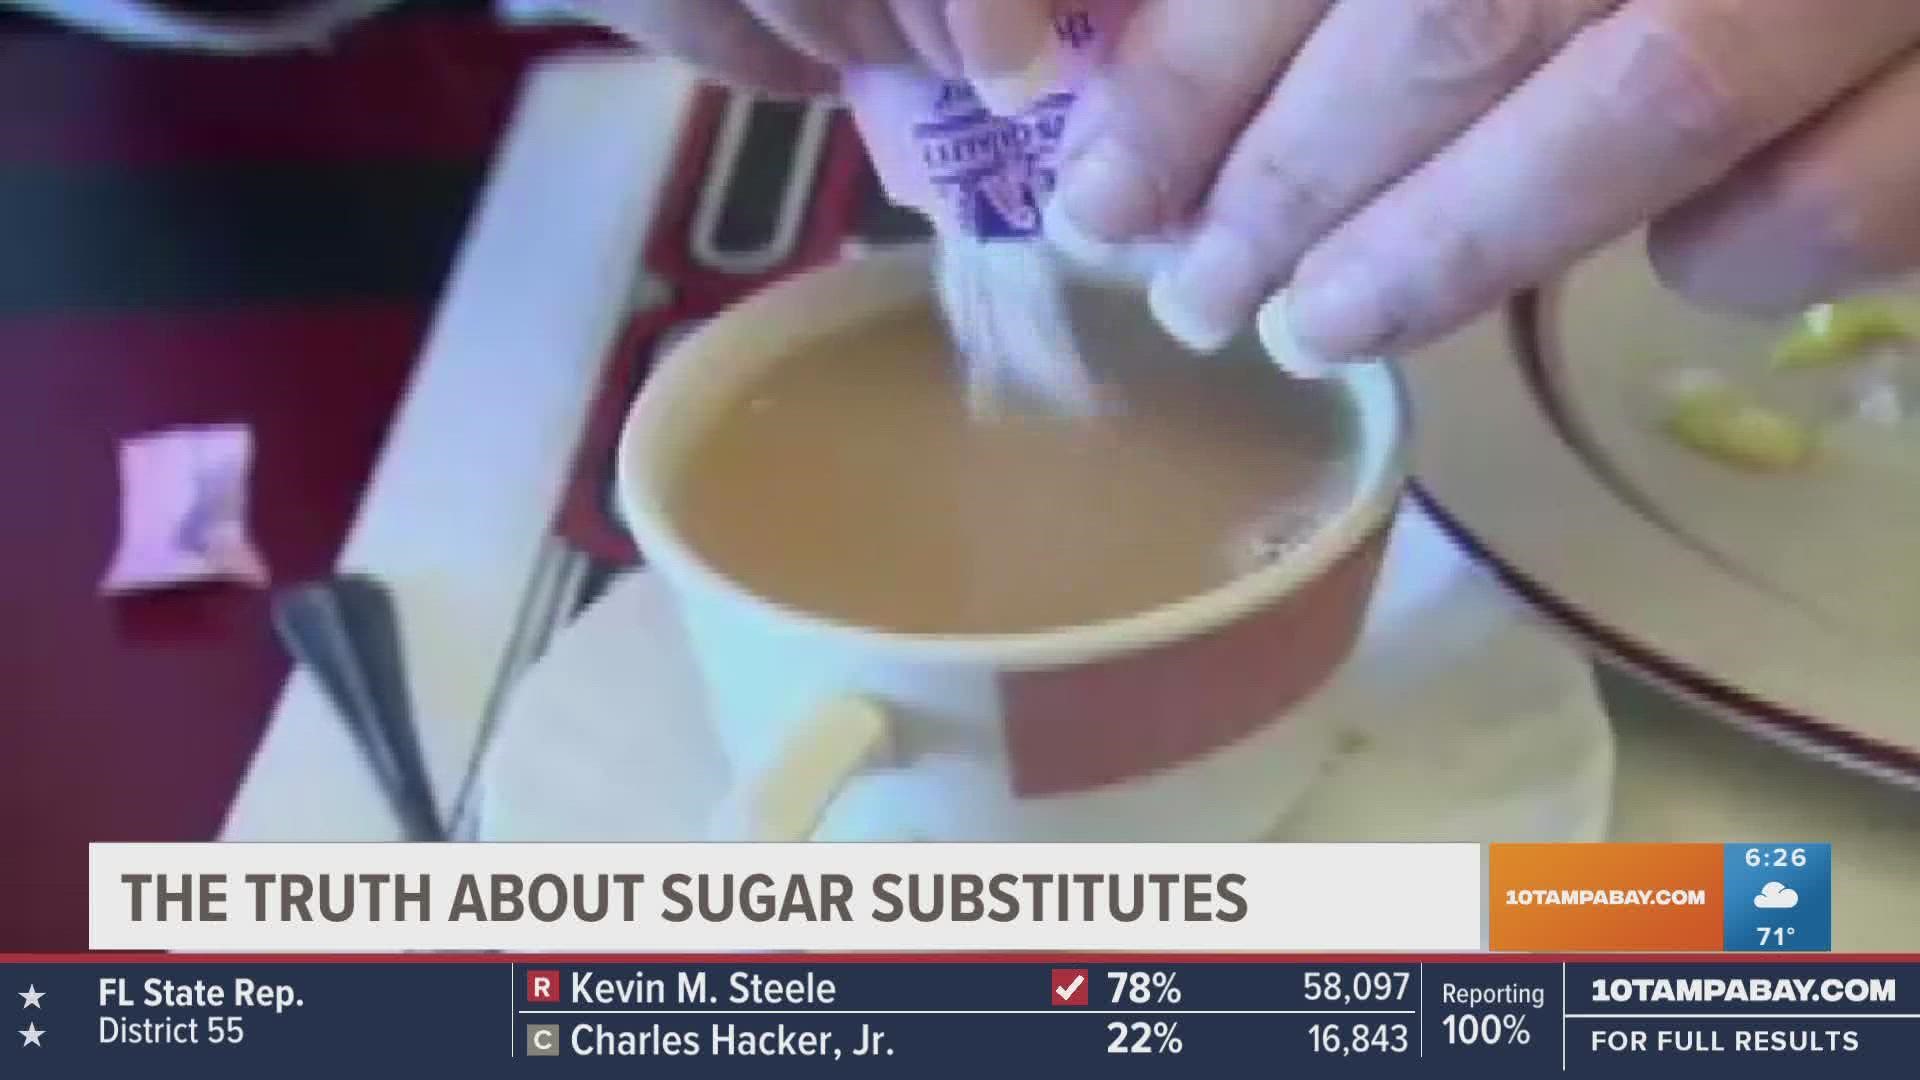 The bottom line is, these sweeteners aren’t harmless, according to one gastroenterologist.